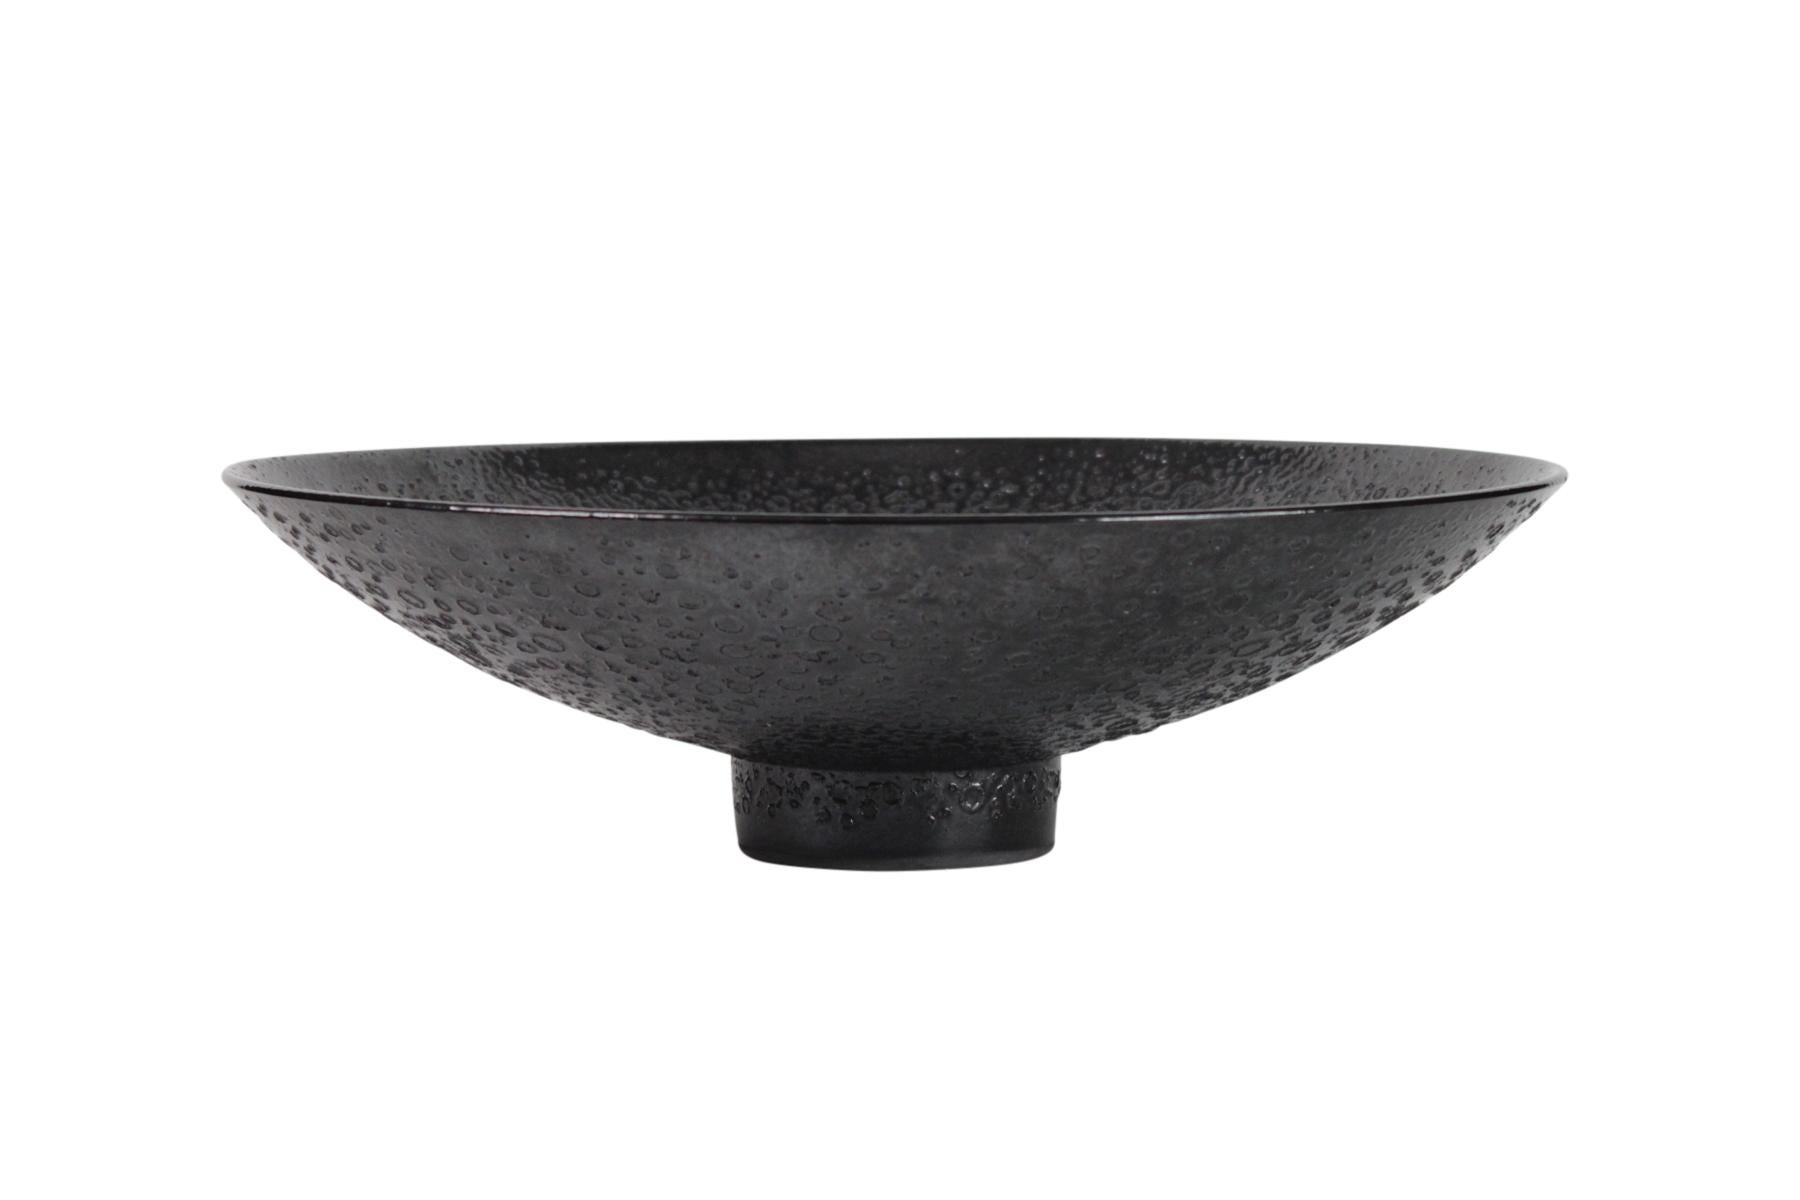 James Lovera massive footed bowl in a black iridescent glaze, measures 18 inches wide.